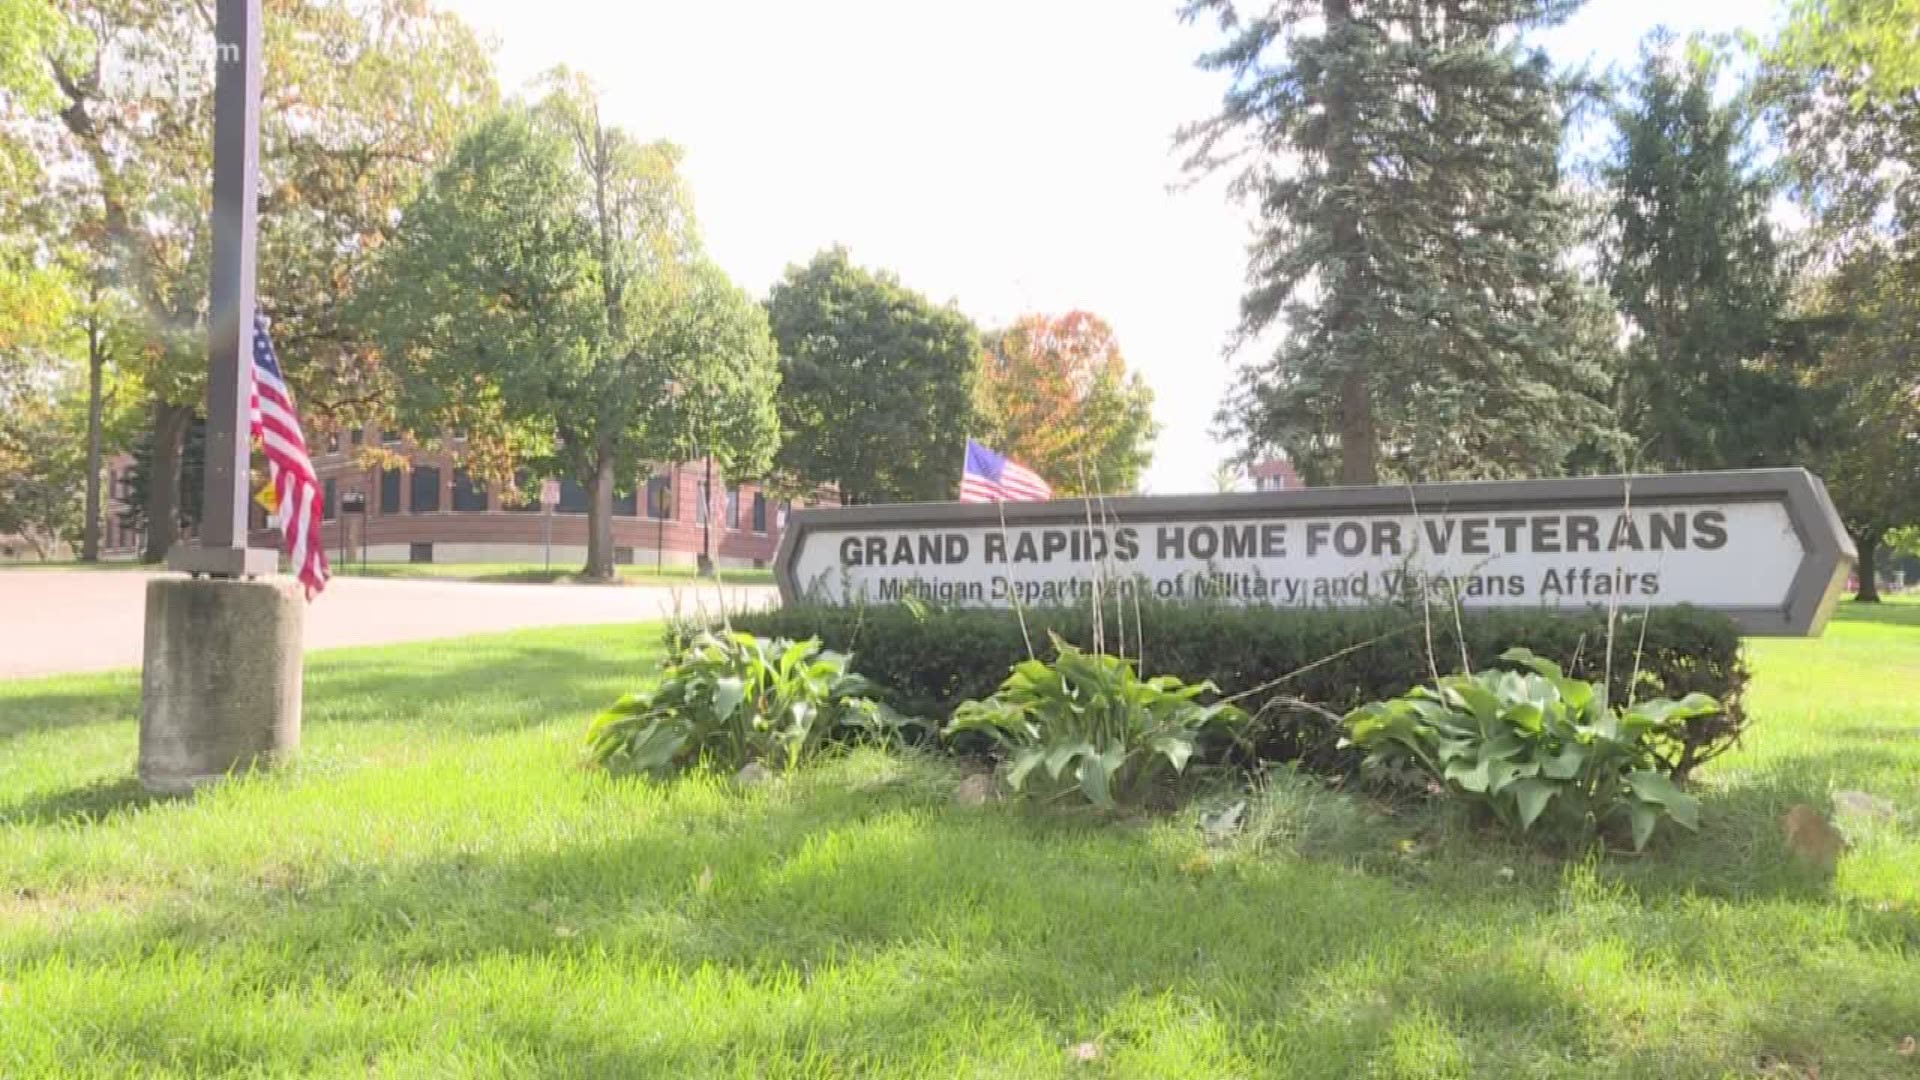 The state found hundreds of thousands of dollars missing from the accounts of residents at the Grand Rapids Home for Veterans. The state-managed home blacked the mistake on account errors -- and transferred nearly $600,000 to fix the problem.